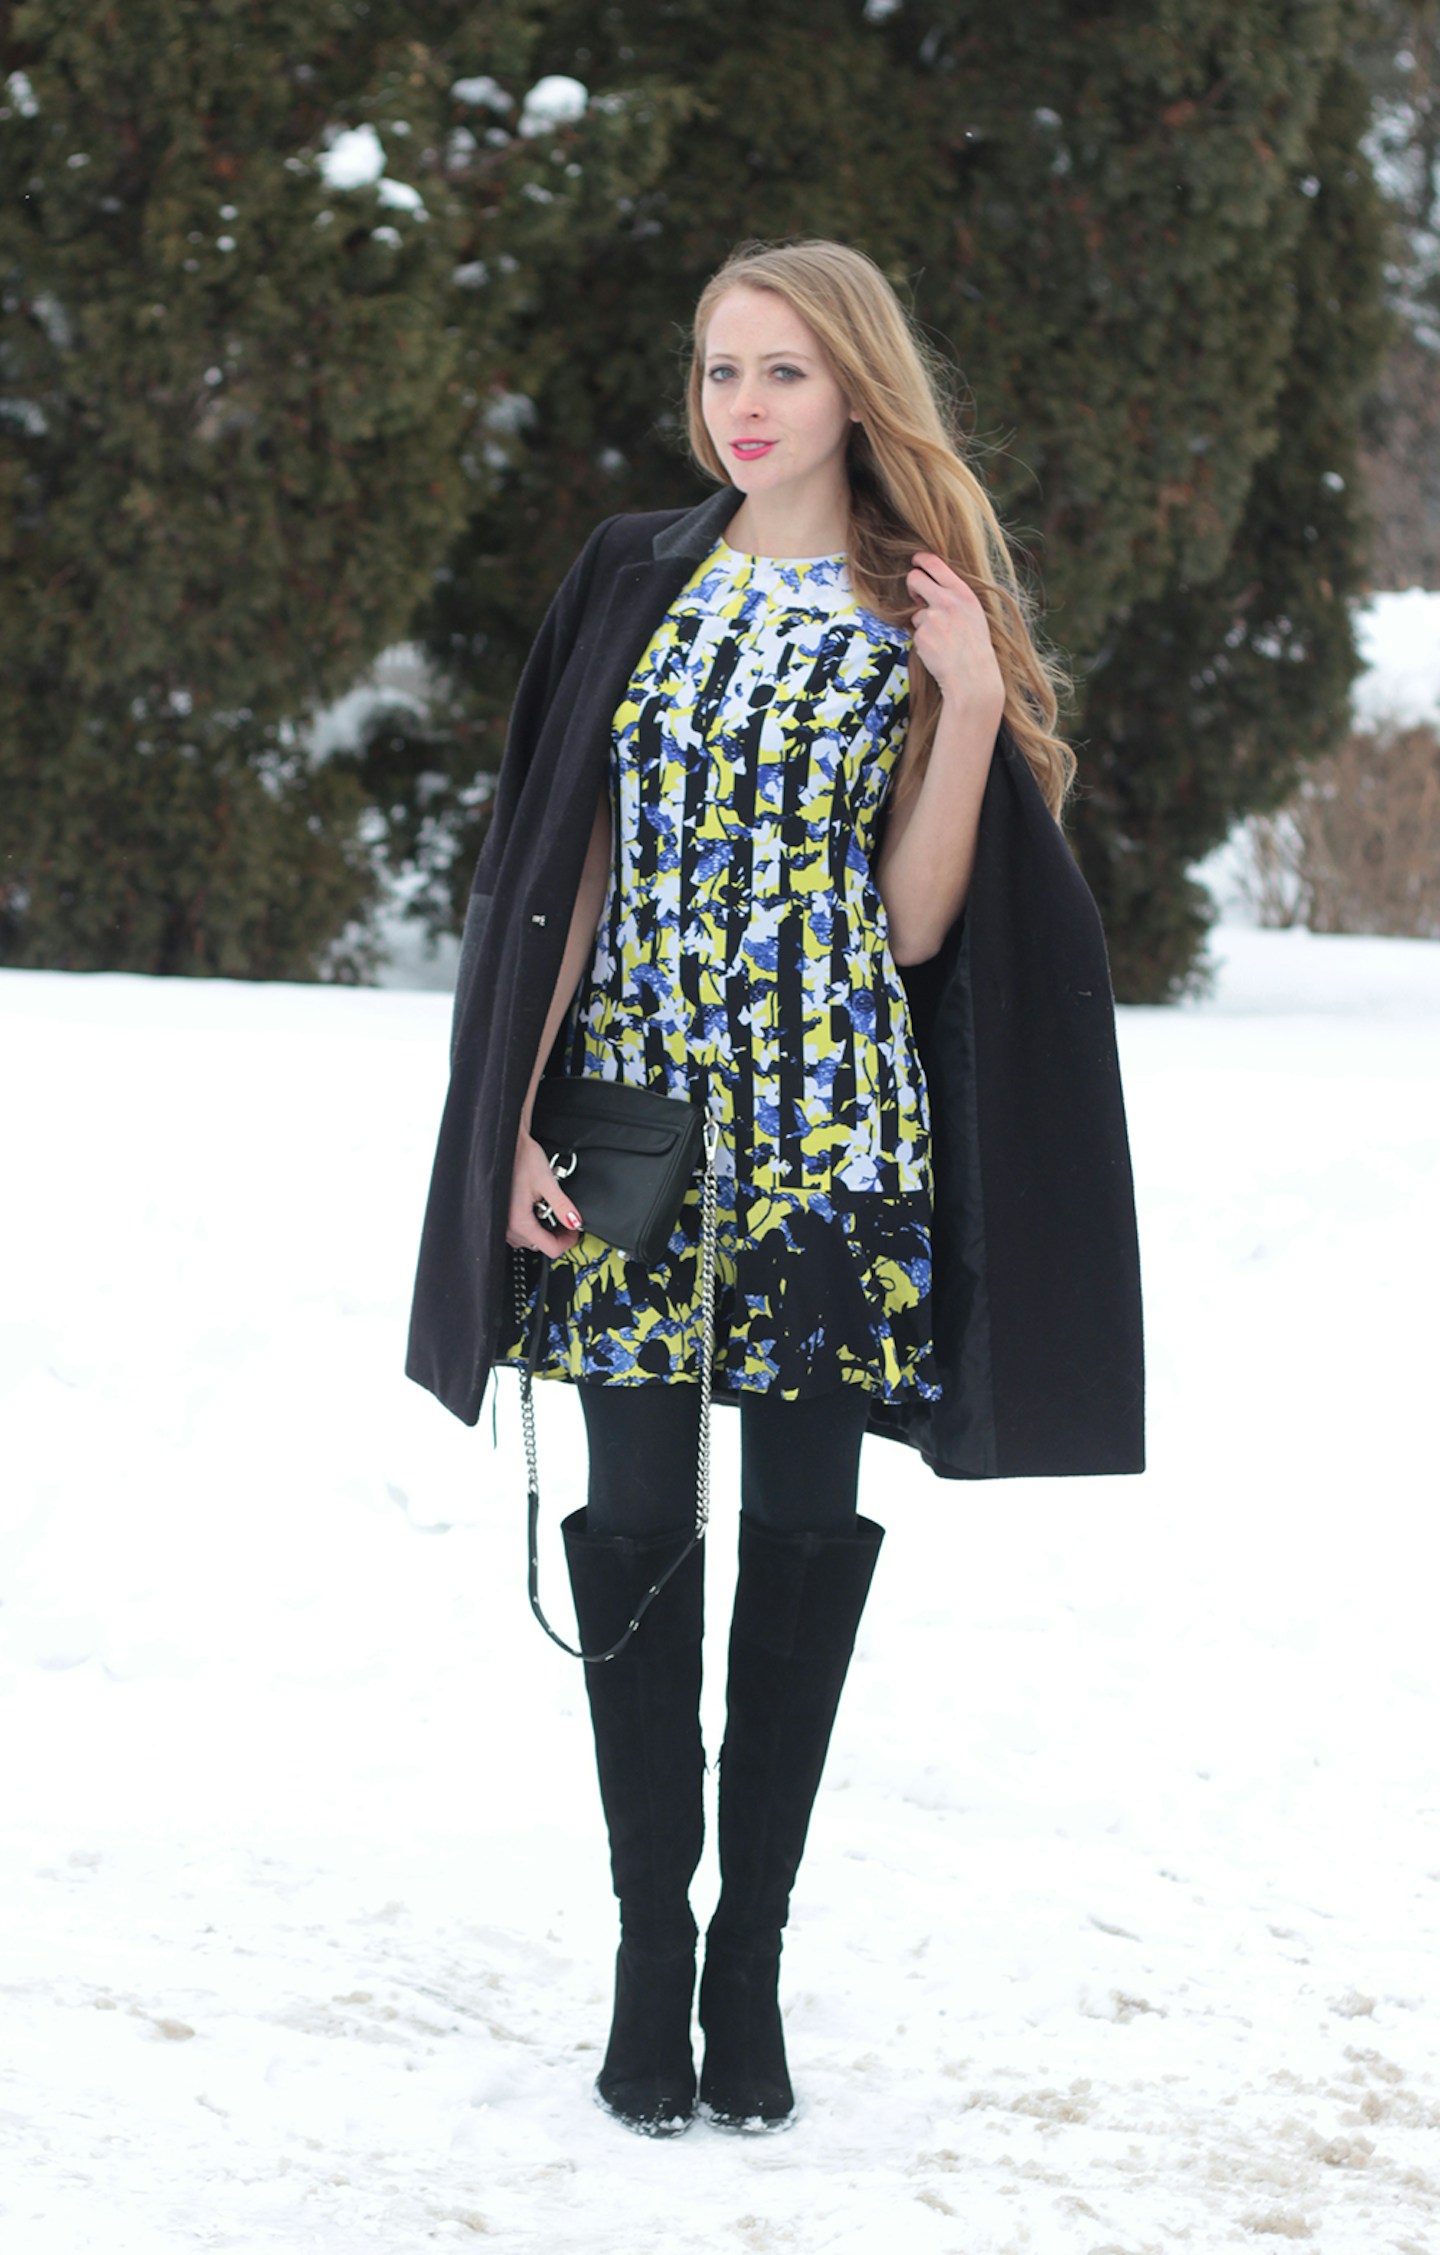 Peter Pilotto for Target – How I styled it